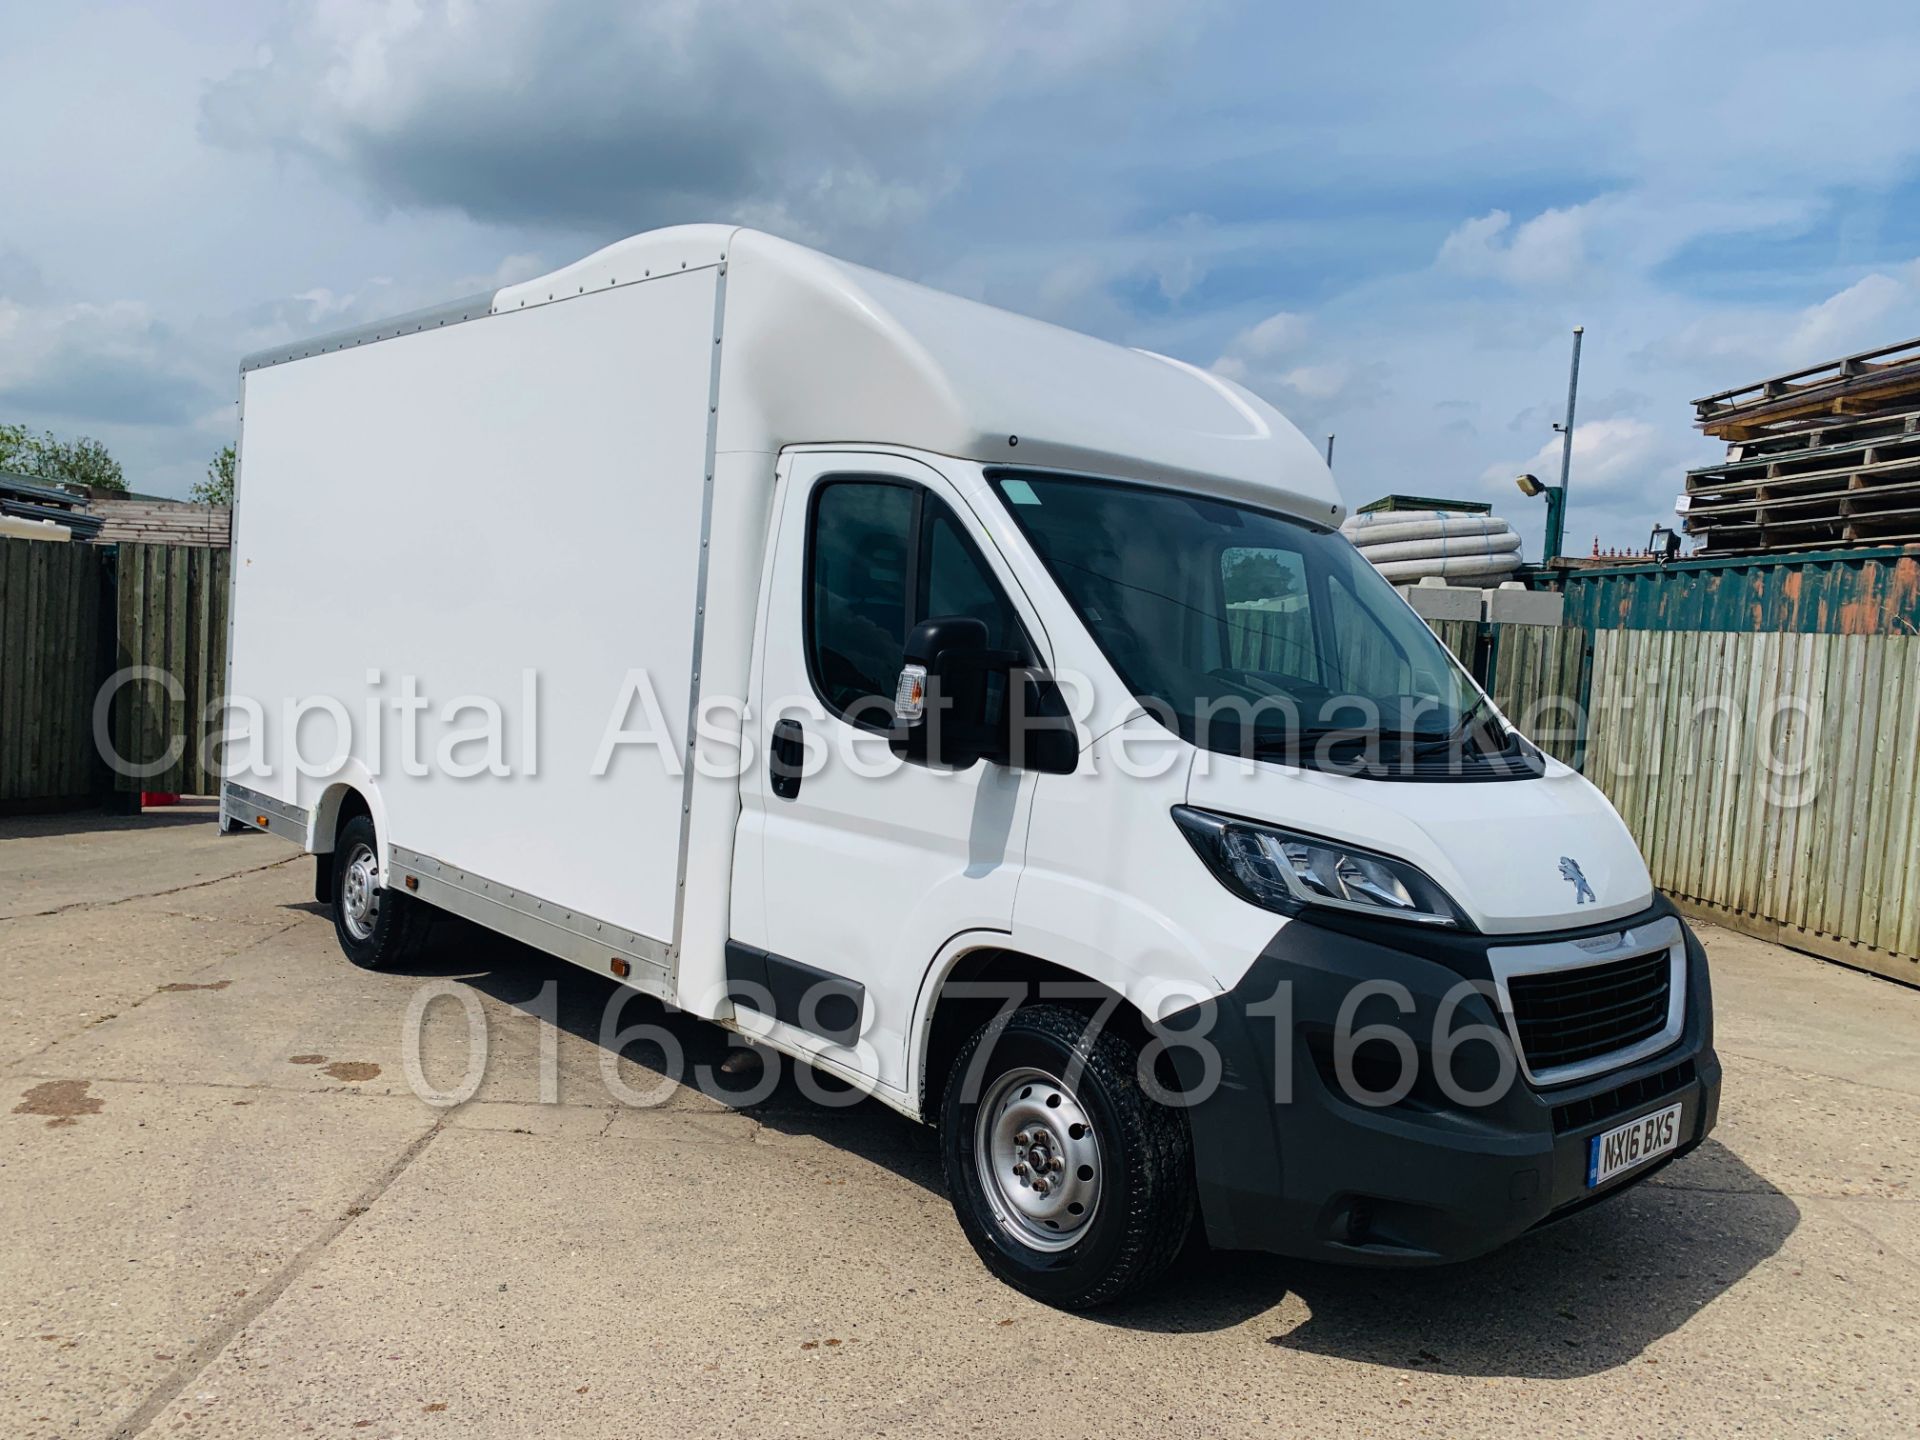 (On Sale) PEUGEOT BOXER *LWB- LO-LOADER / LUTON* (2016) '2.2 HDI - 6 SPEED' (1 OWNER - FULL HISTORY) - Image 3 of 31